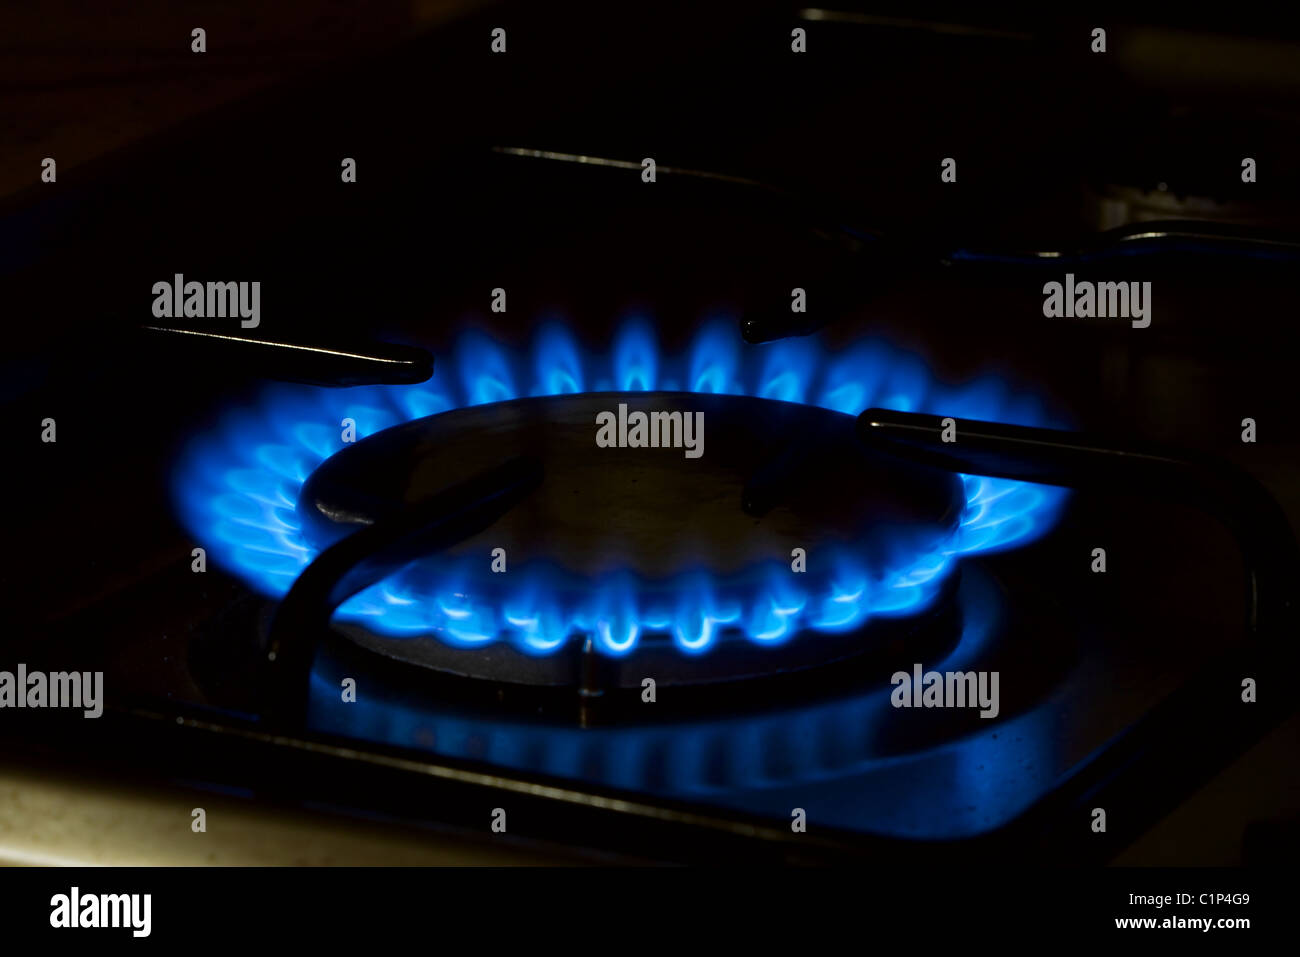 Burner of a stove with blue flame Stock Photo